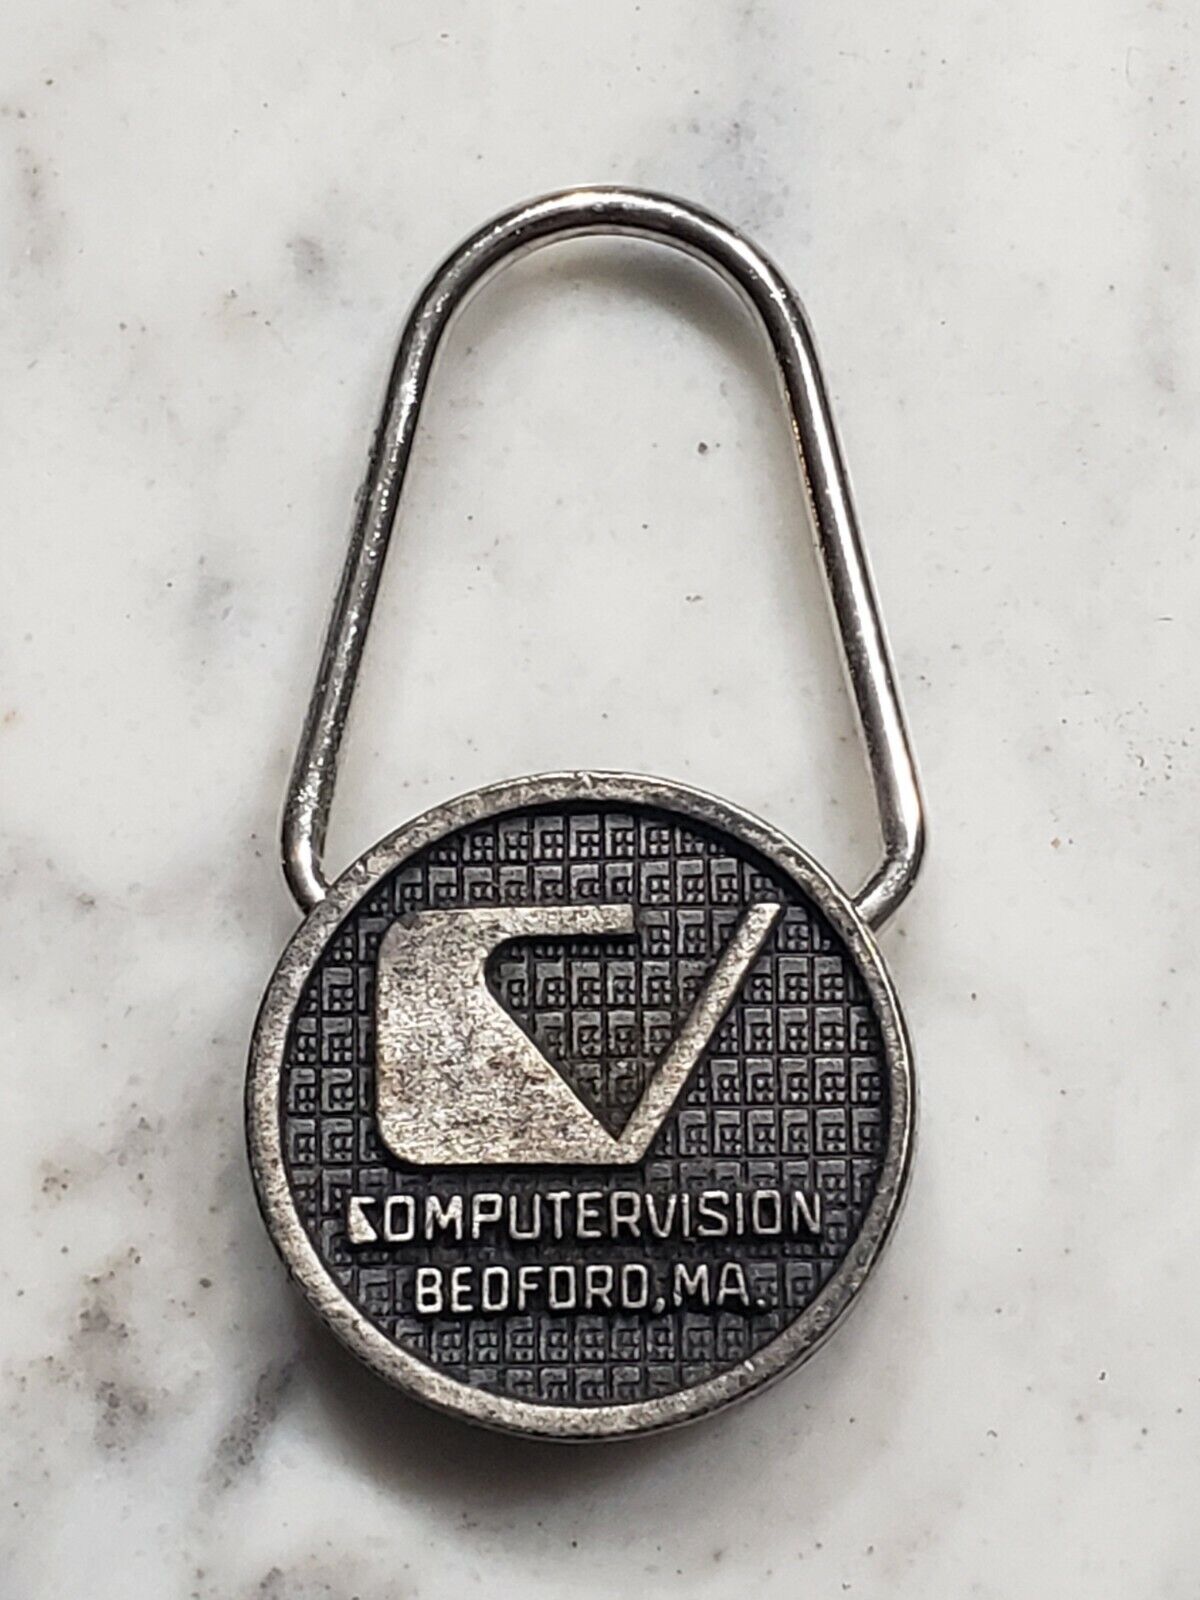 Vintage 1970s Computervision CV Flying Cloud CAD CAM Bedford MA Keychain